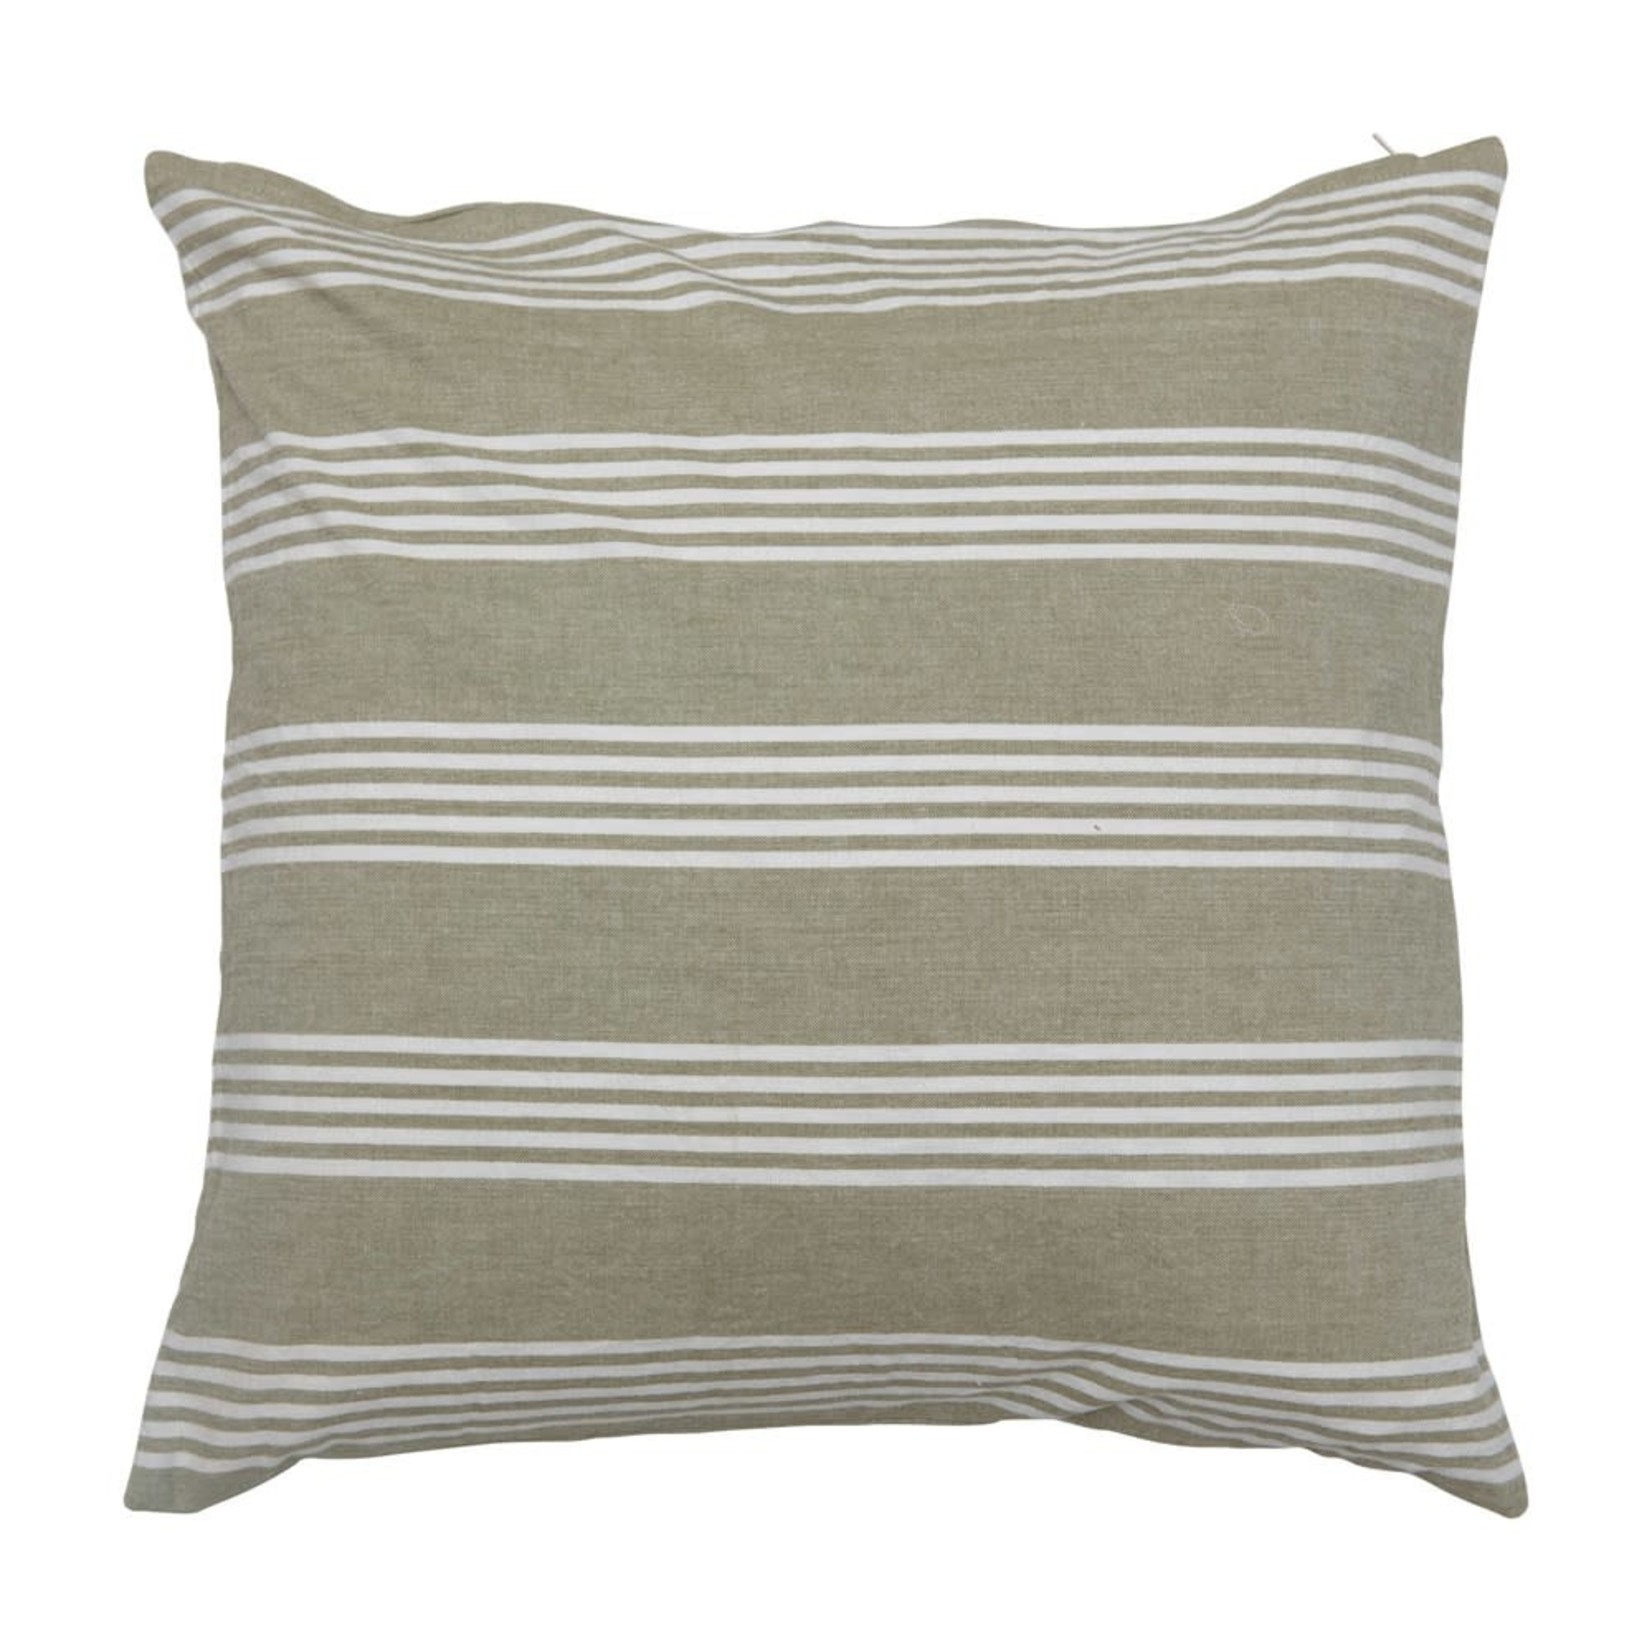 20" Square Woven Cotton Pillow with Stripes, Sage Color & White